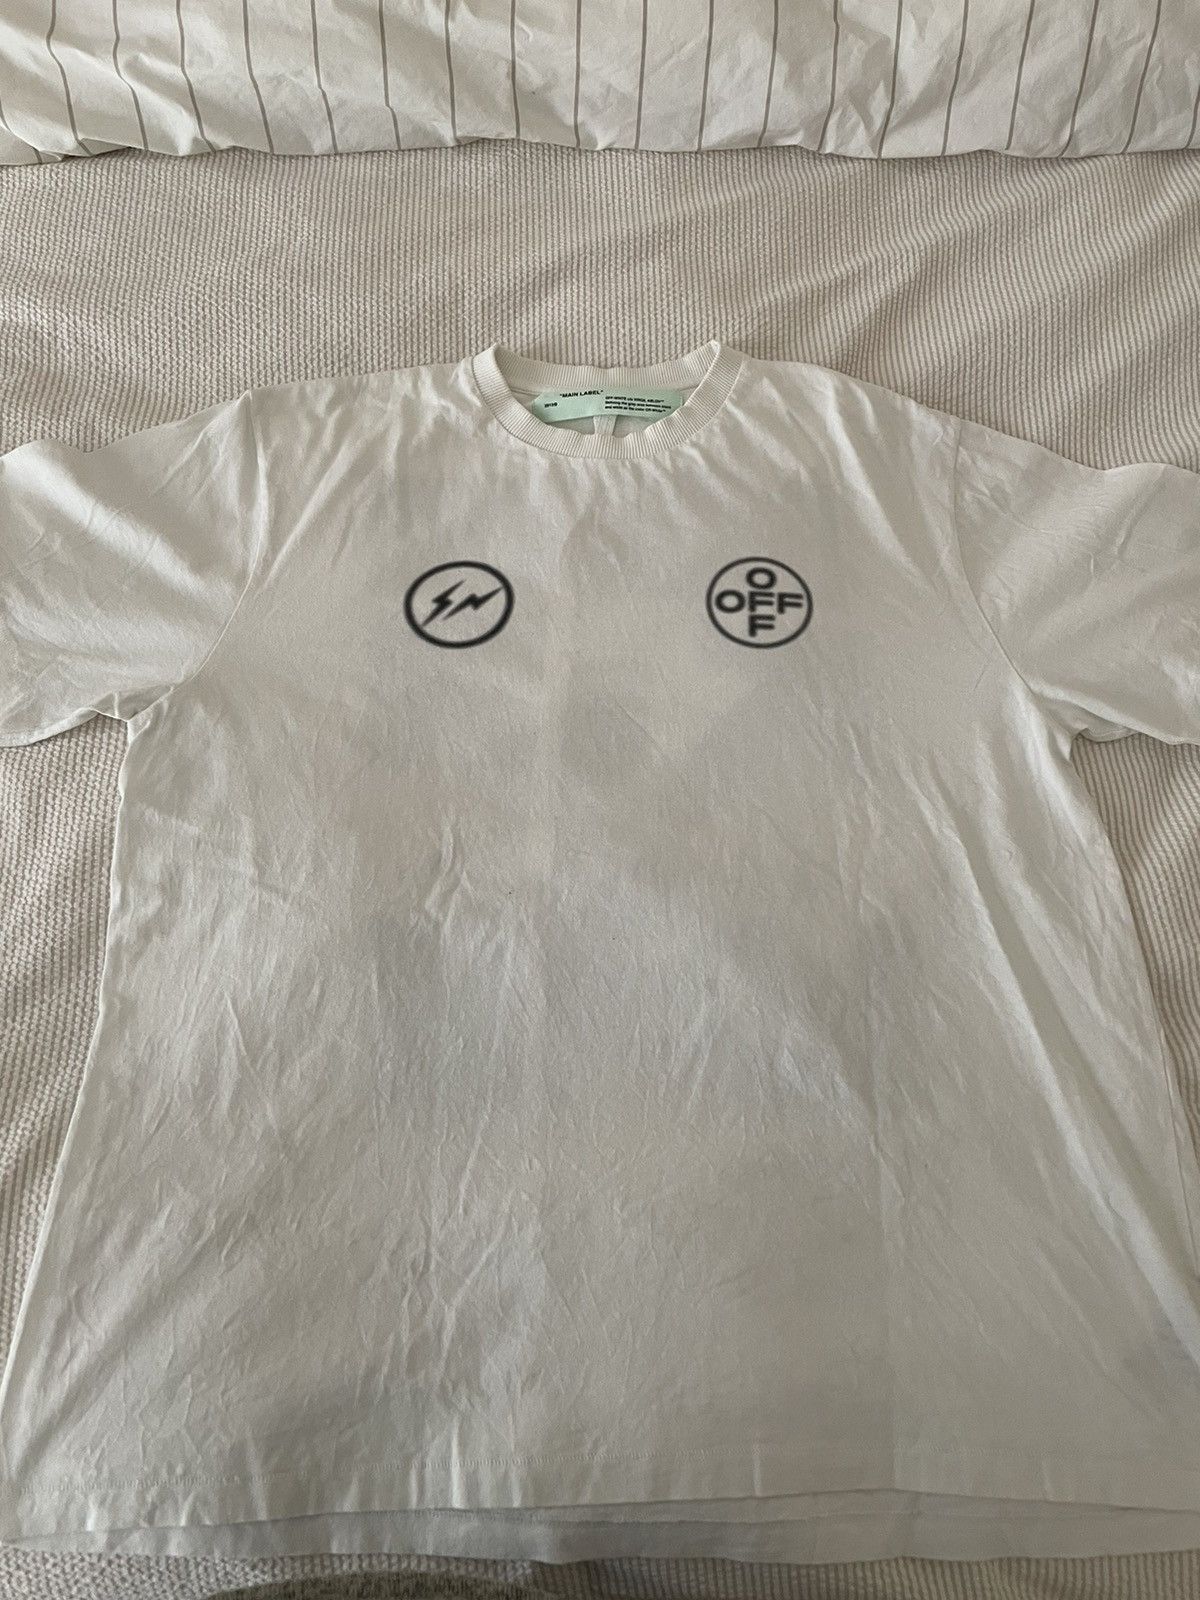 Off-White Off-White x Fragment Design Cereal T-Shirt | Grailed